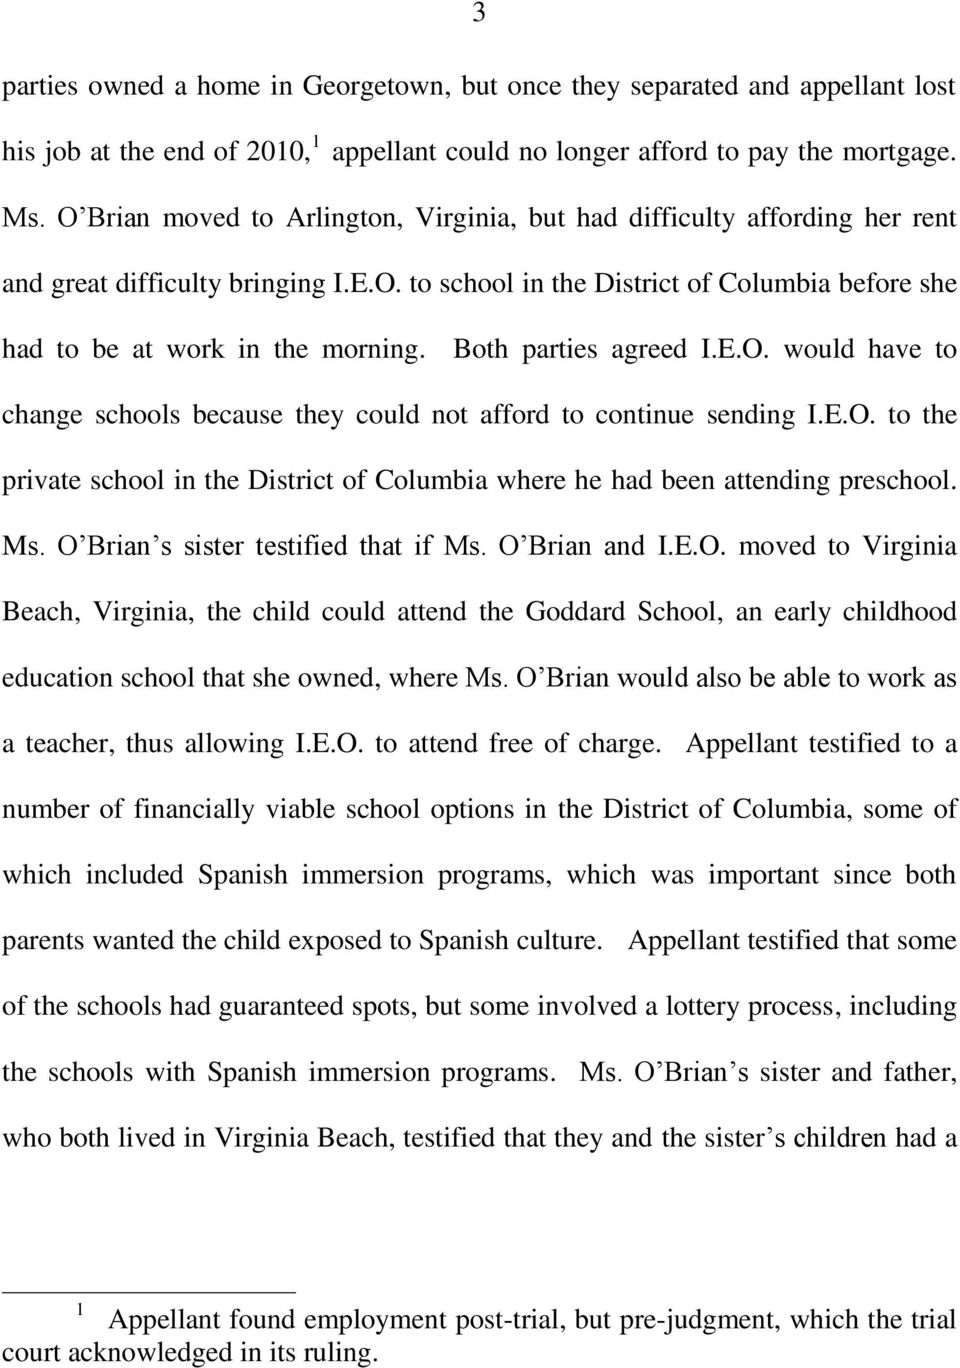 Both parties agreed I.E.O. would have to change schools because they could not afford to continue sending I.E.O. to the private school in the District of Columbia where he had been attending preschool.